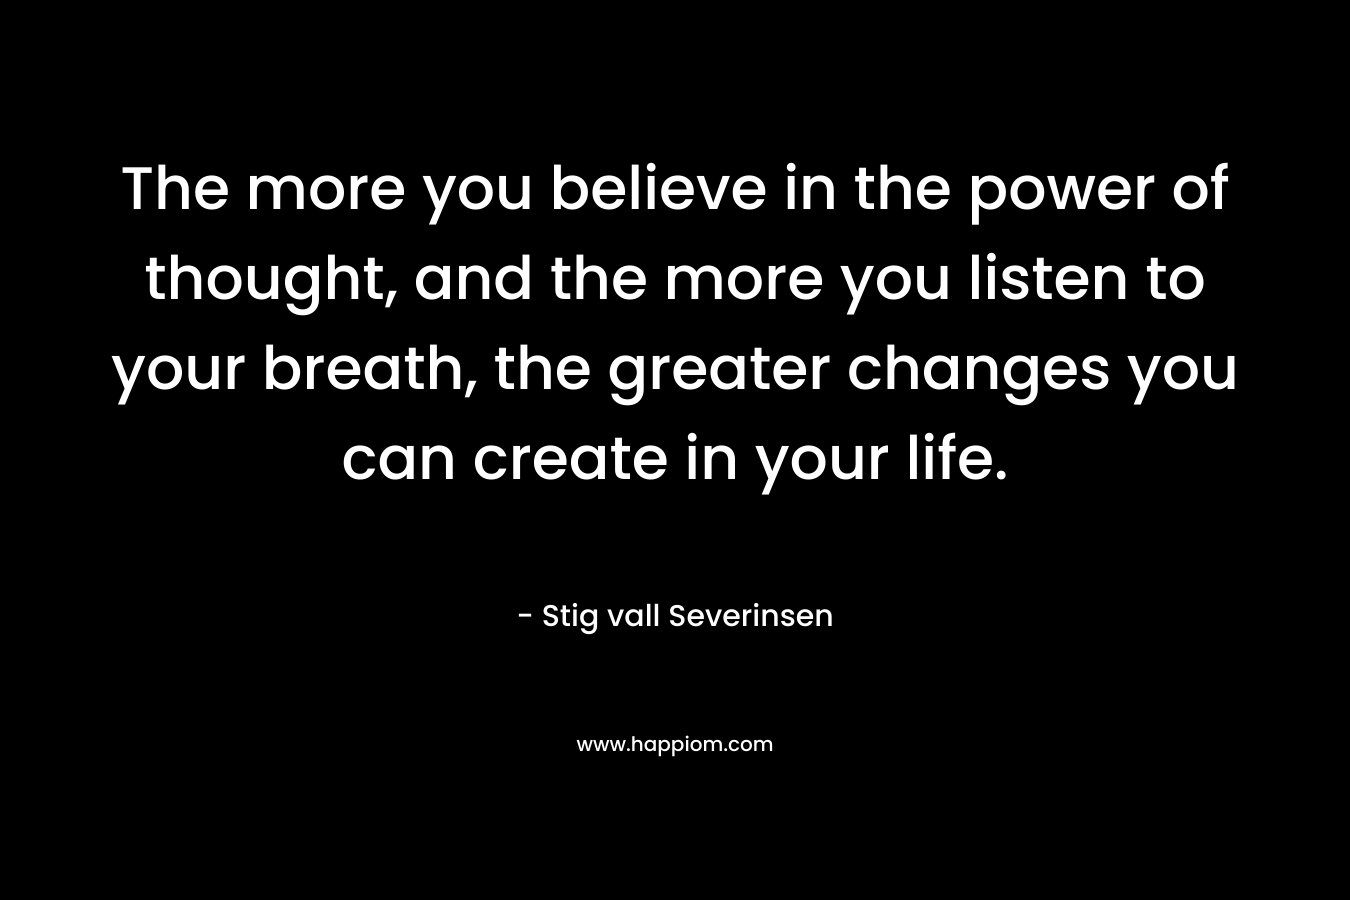 The more you believe in the power of thought, and the more you listen to your breath, the greater changes you can create in your life.